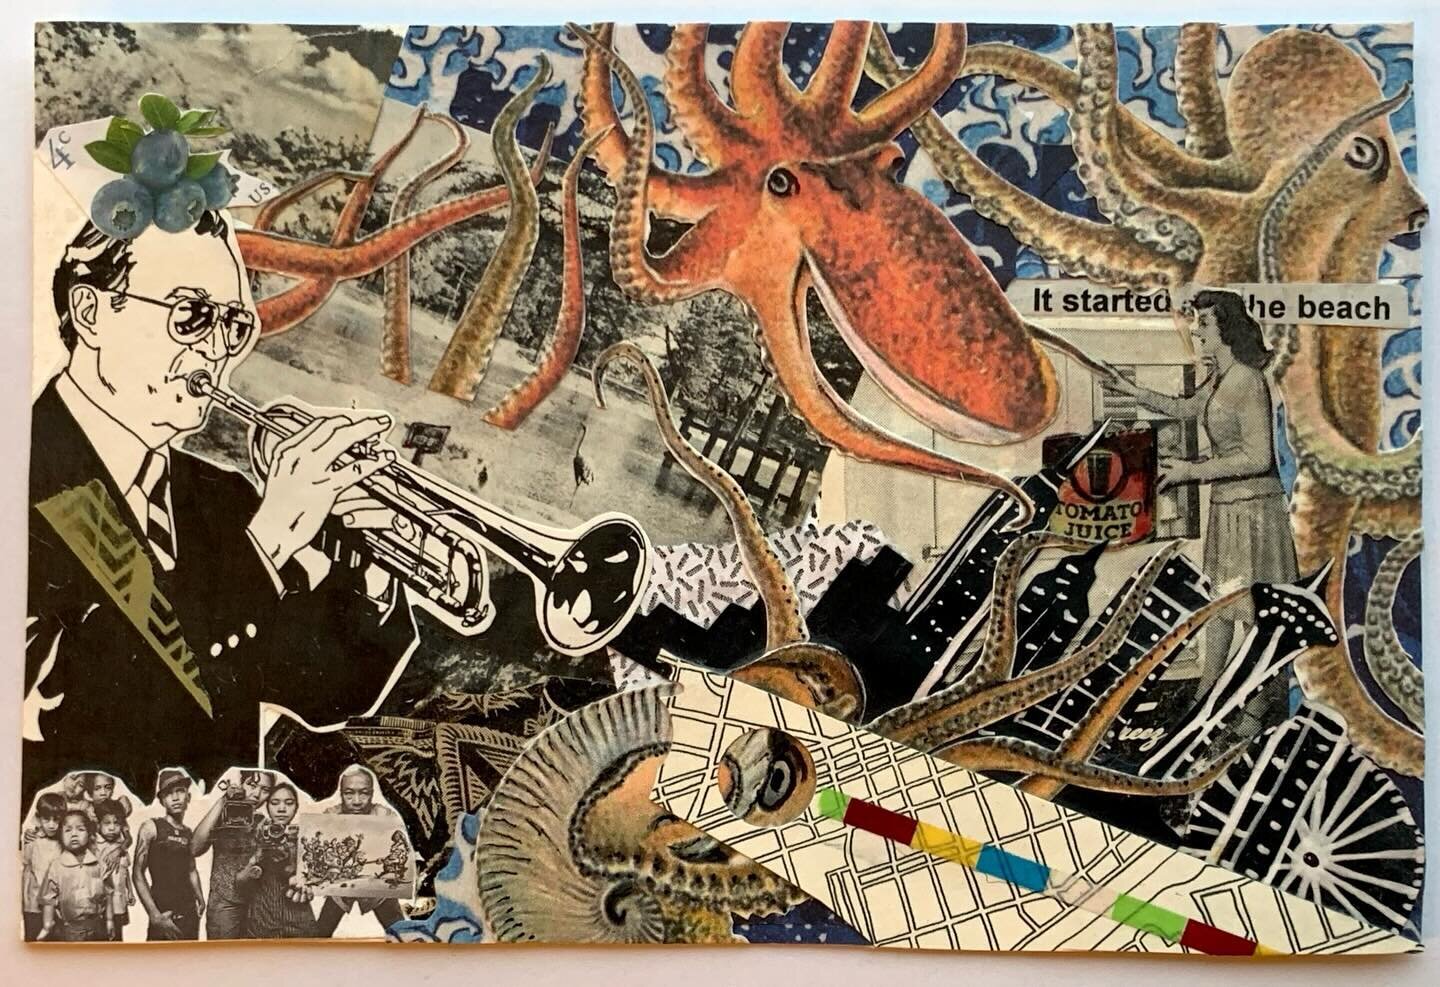 My final collage is going out!! These are the final additions to my original collage that was sent out. Scroll for reverse process pictures. 4 other artists contributed to it, all in black and white, then I added color, and unified elements. And now 